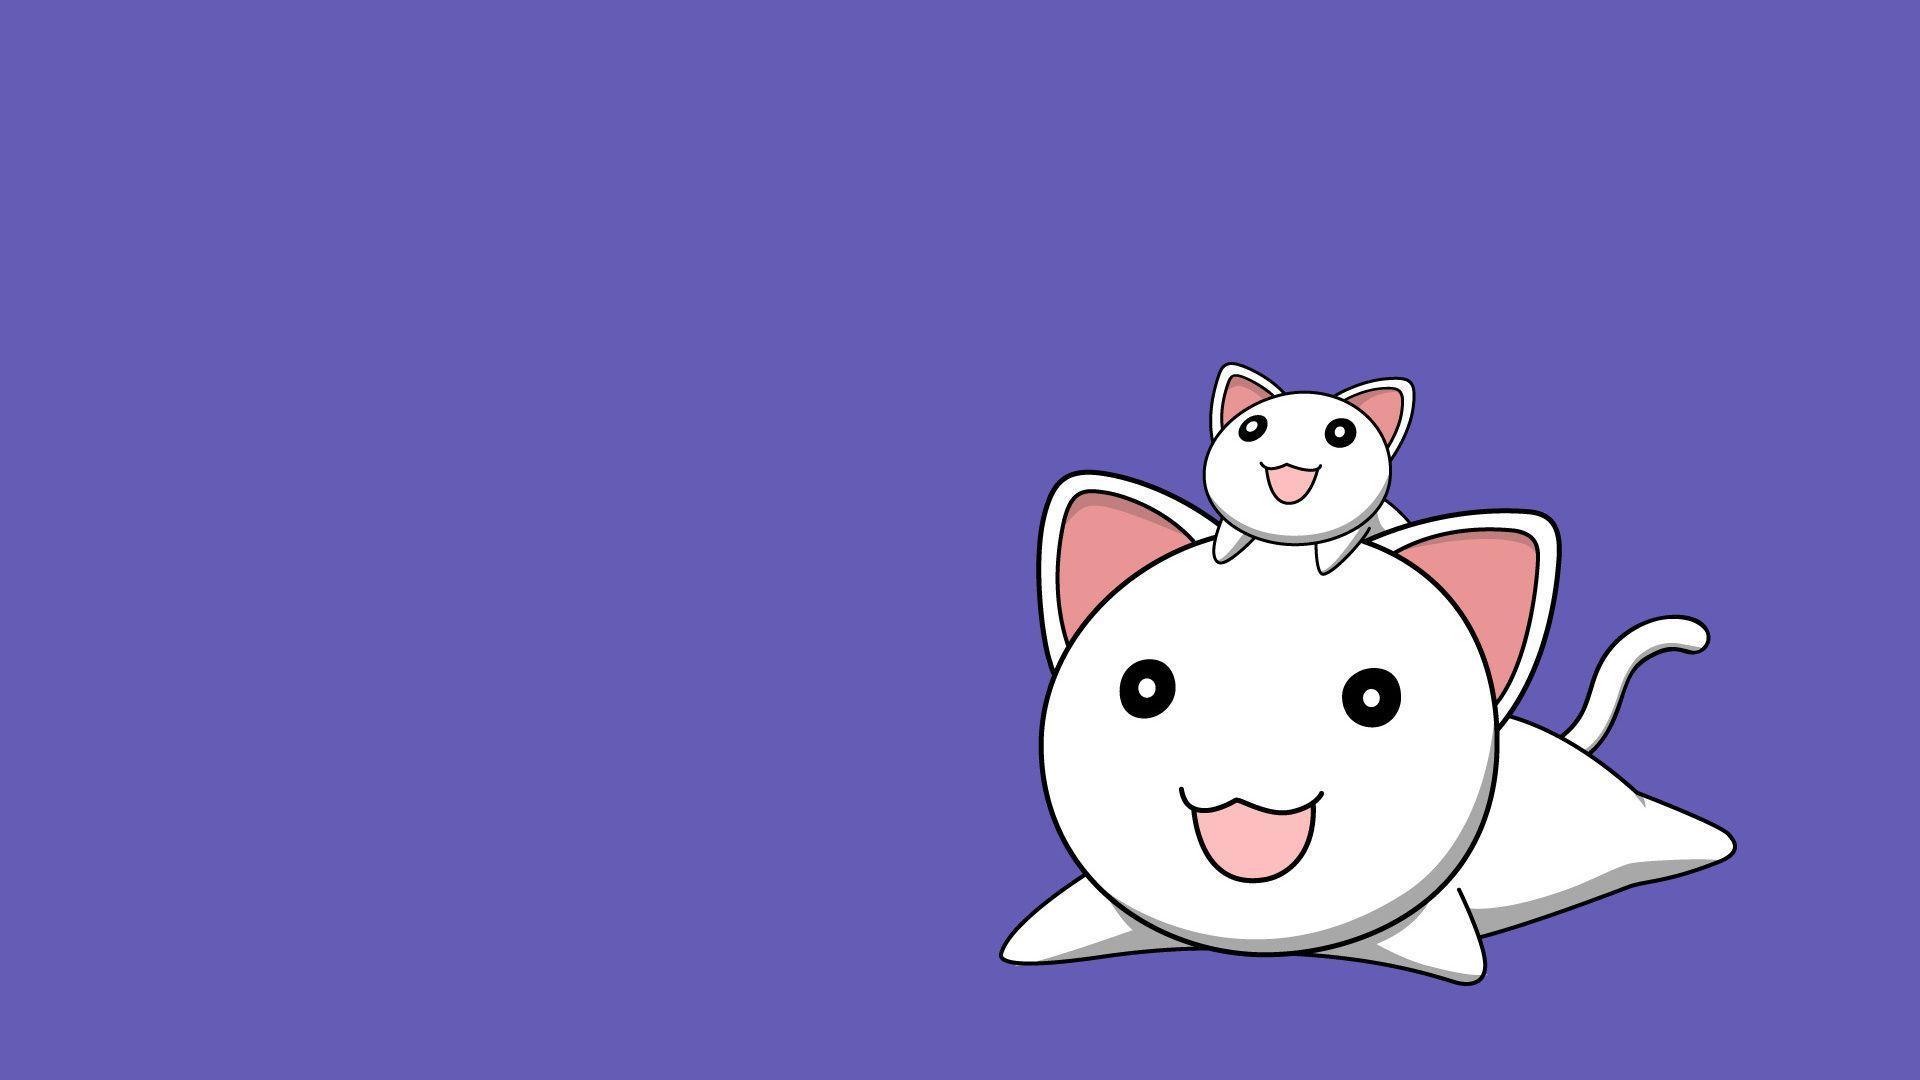 Wallpaper.wiki High Resolution Anime Cat PIC WPC0012472